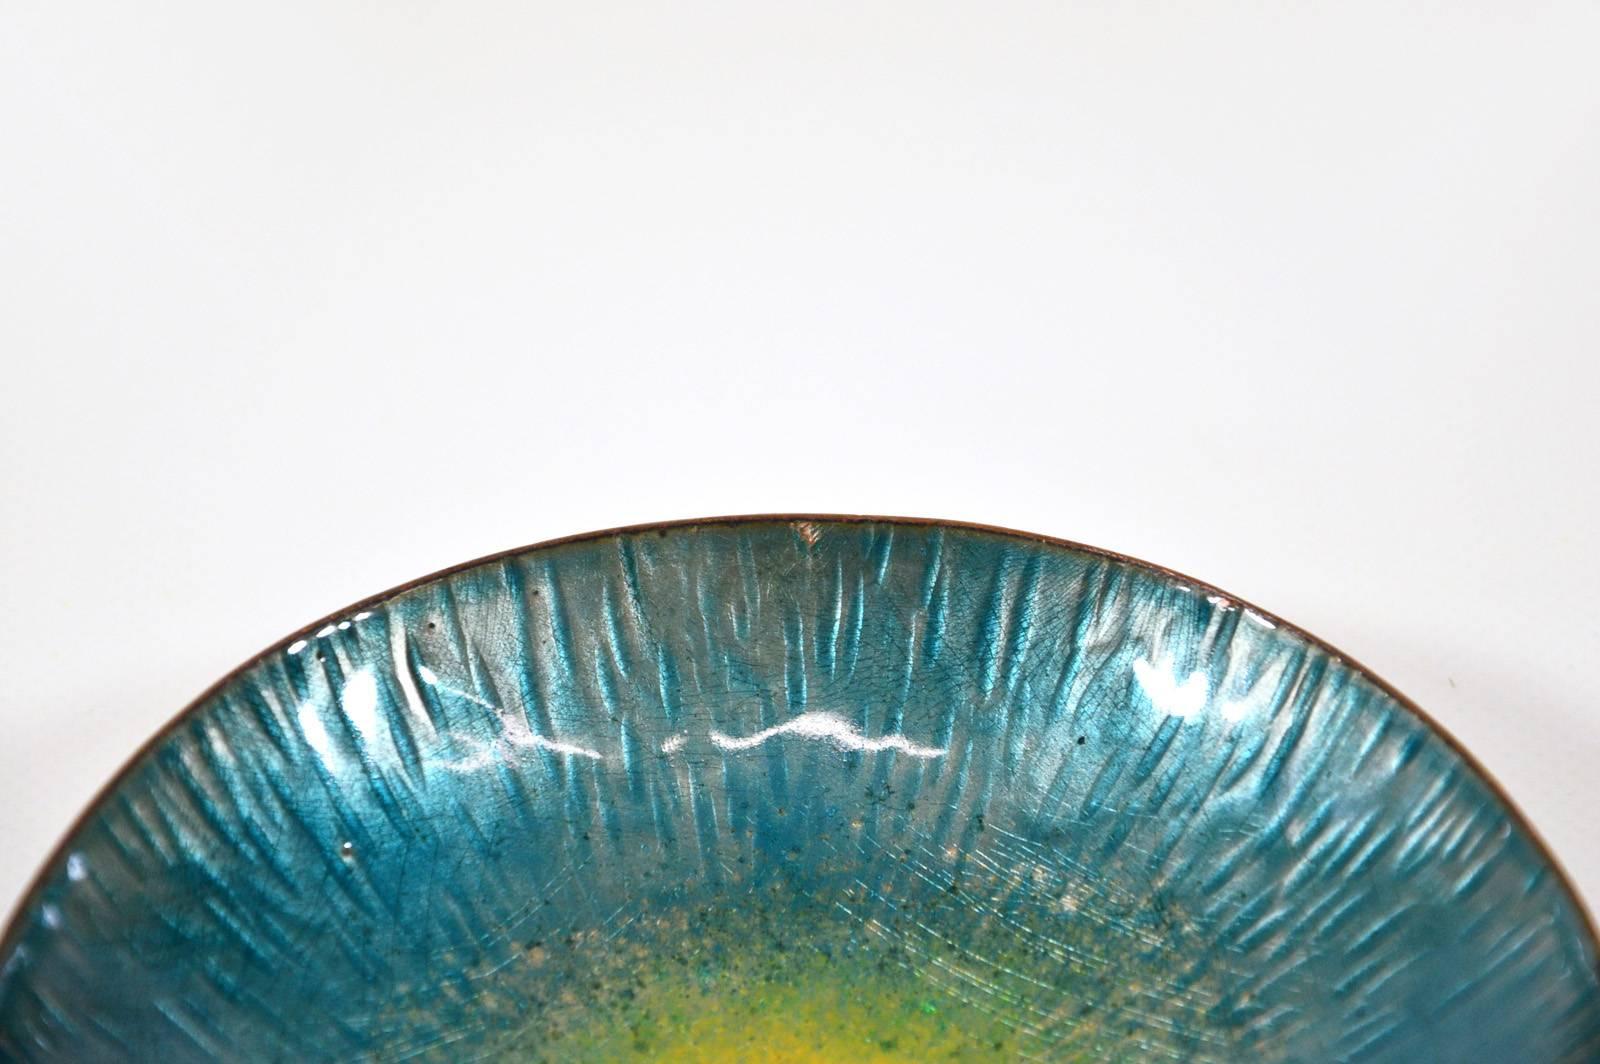 Enameled Italian Design Midcentury Turquoise and Yellow Enamel Bowl after Paolo De Poli